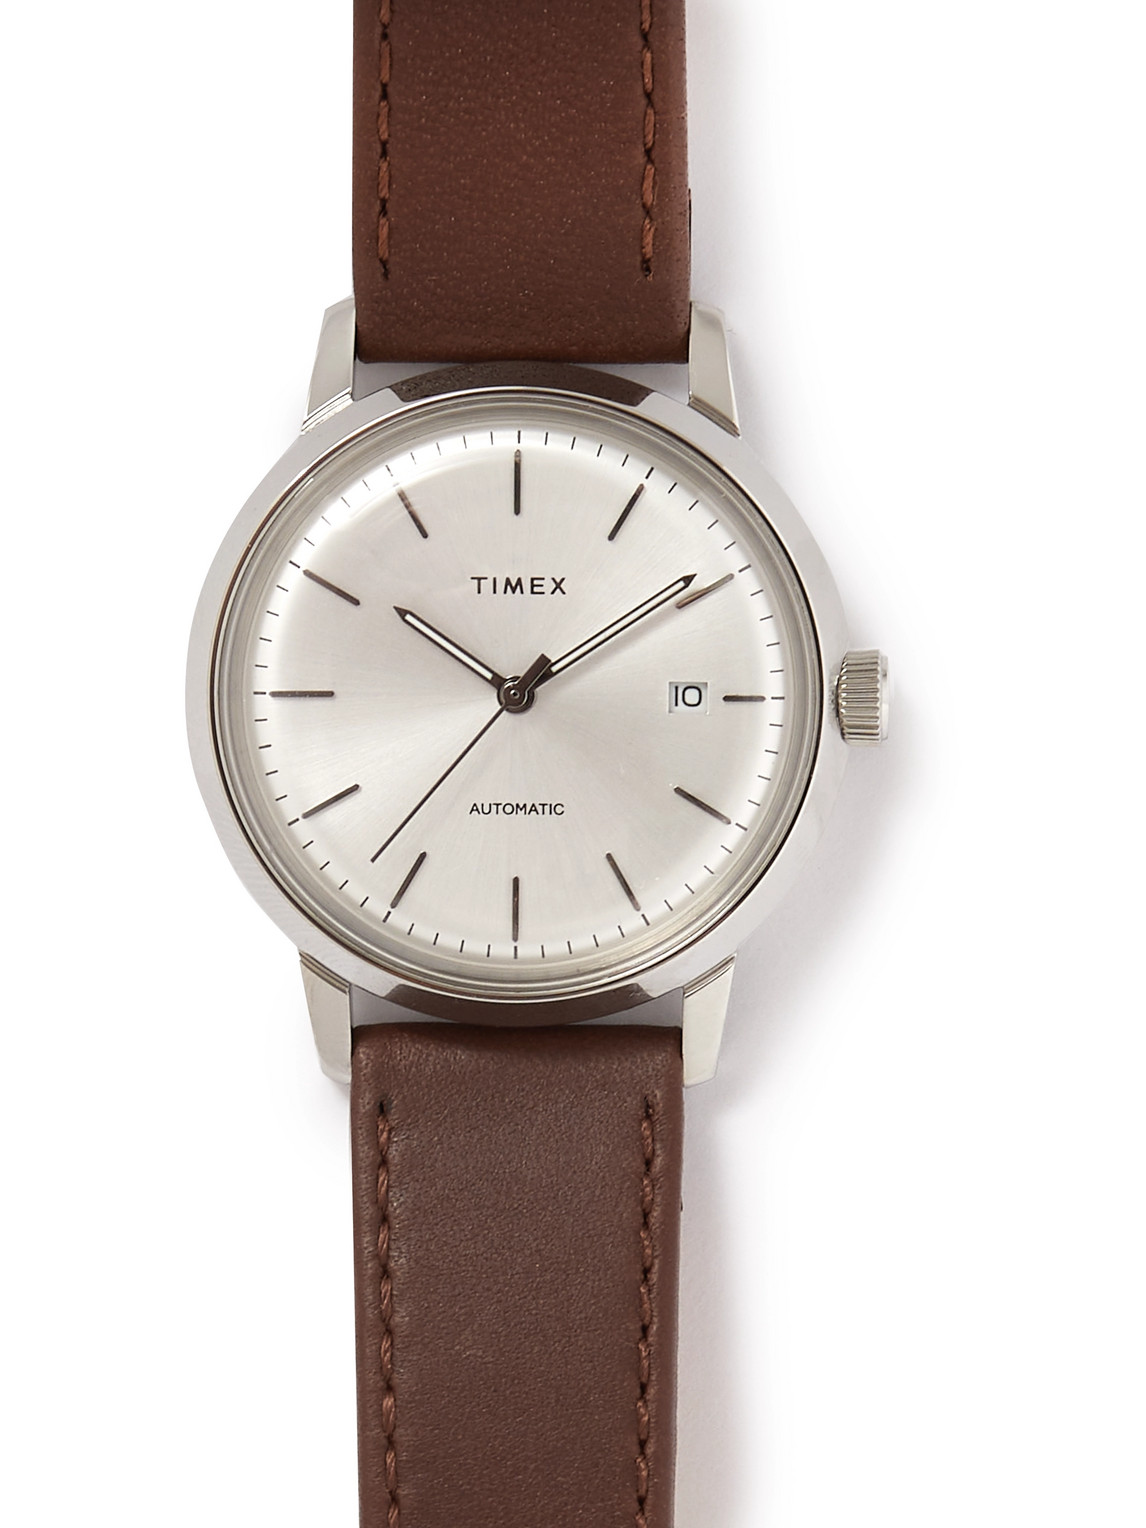 Timex Marlin Automatic 40mm Stainless Steel and Leather Watch | Smart Closet